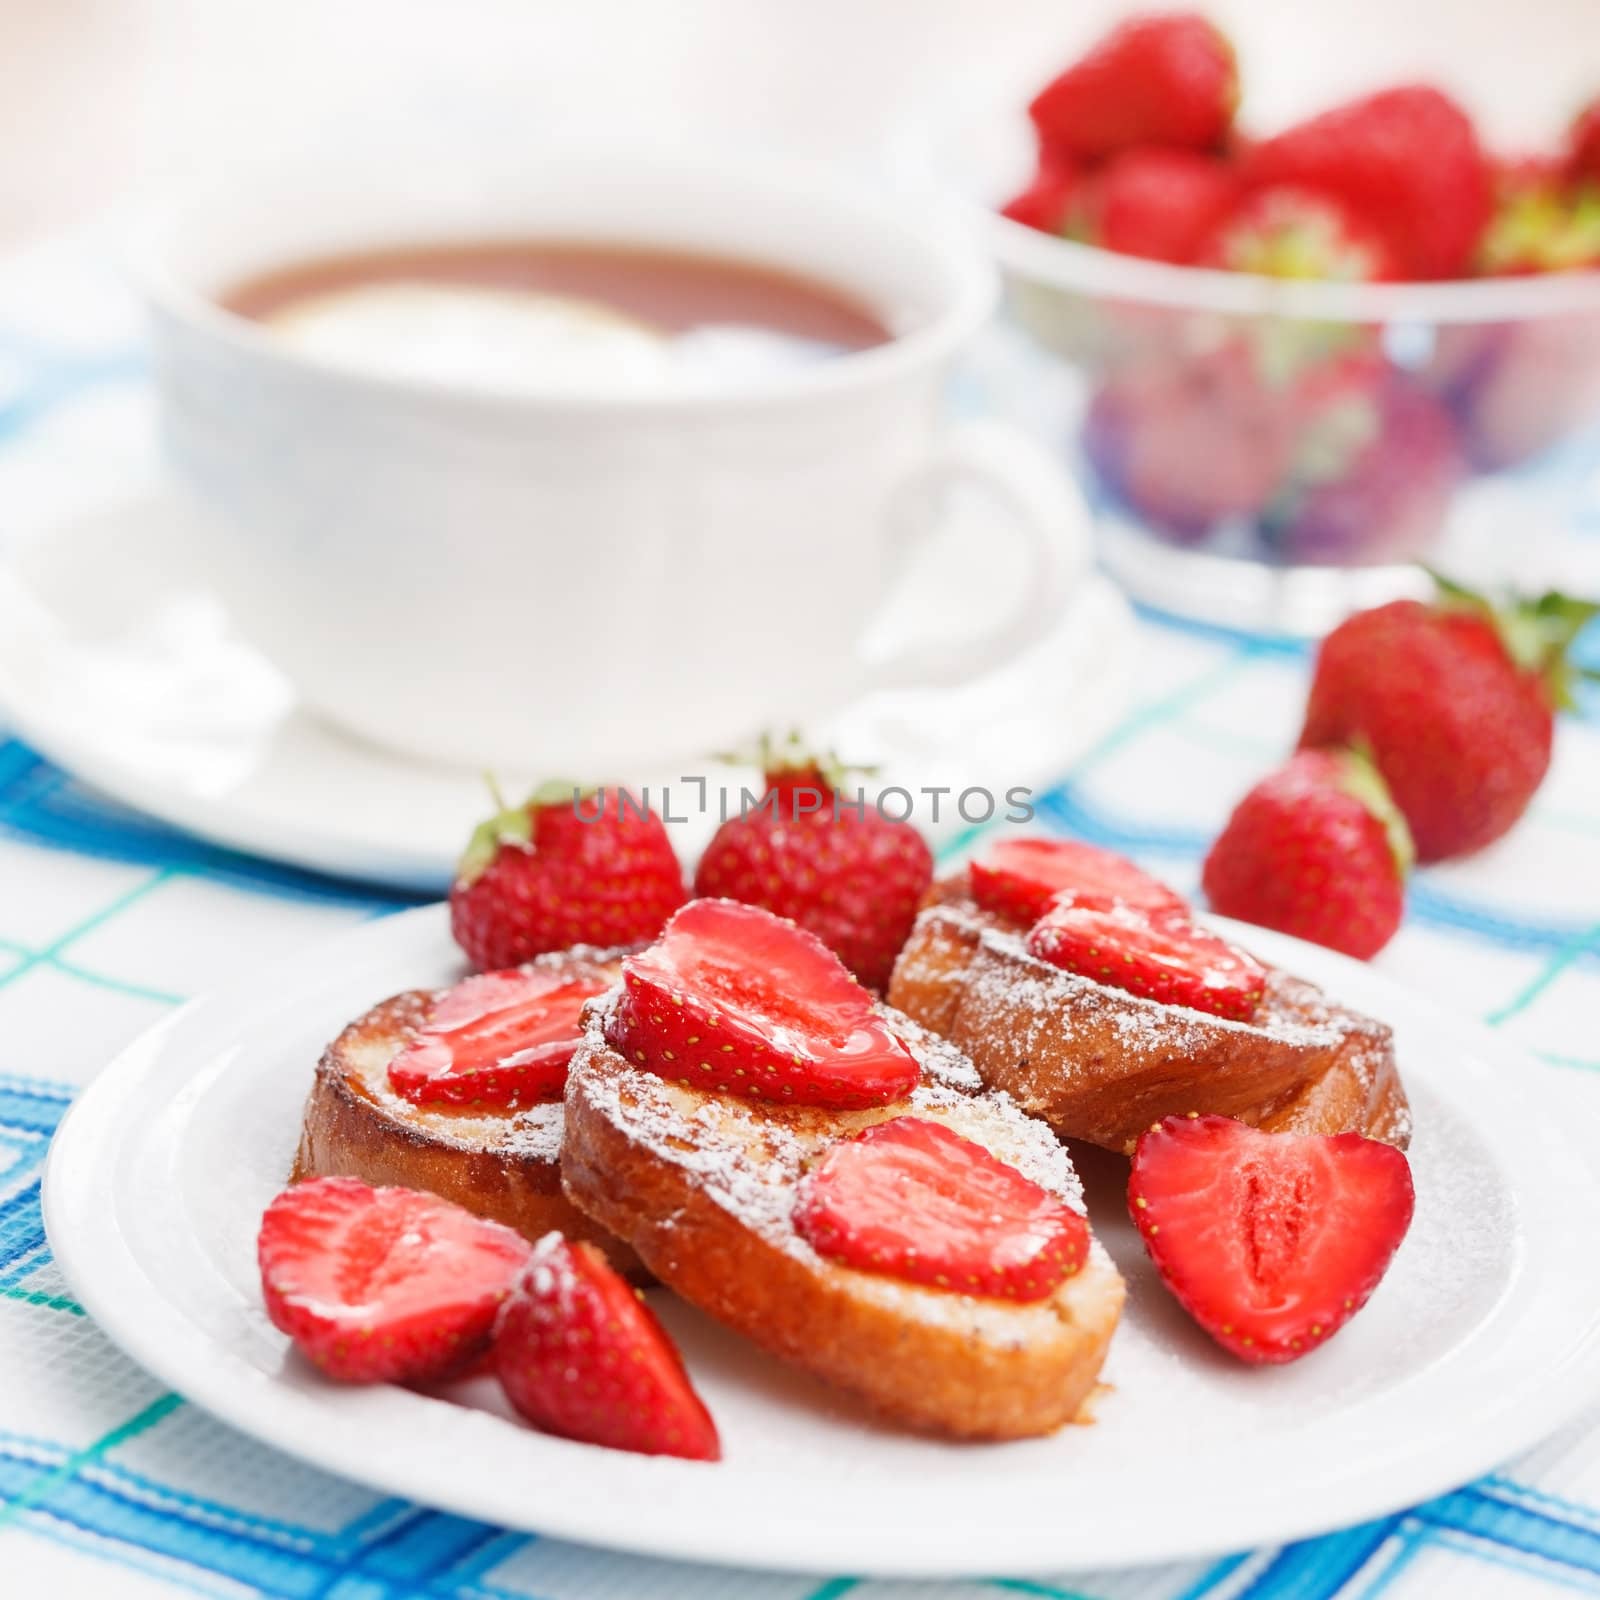 French toasts with powdered sugar and a strawberry by shebeko